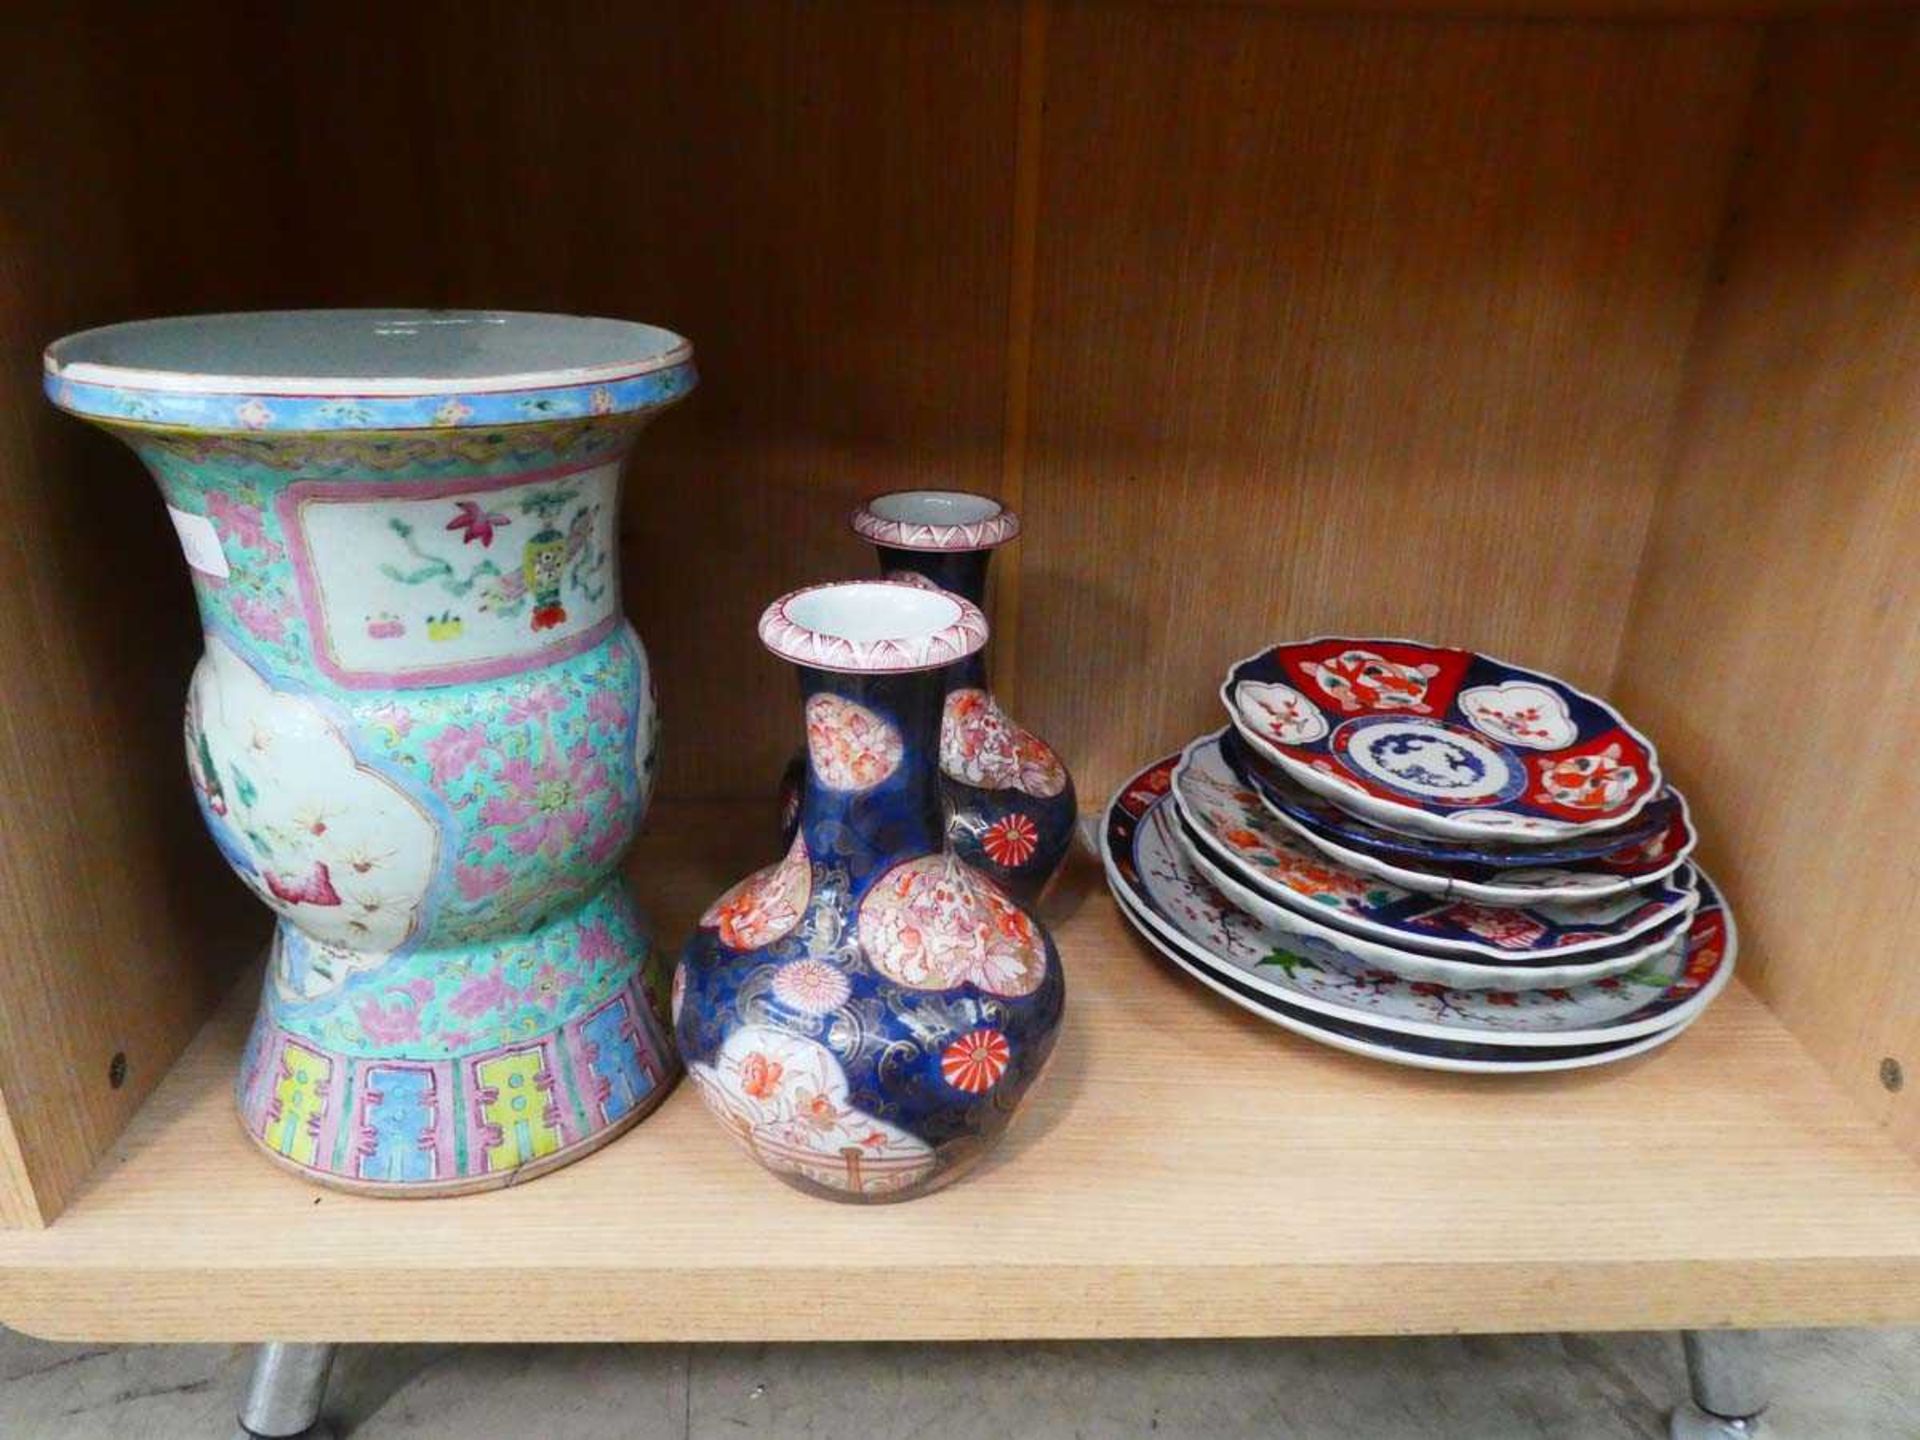 Oty of oriental style china to include plates,vases and bowls (2 shelves) Few pieces have some